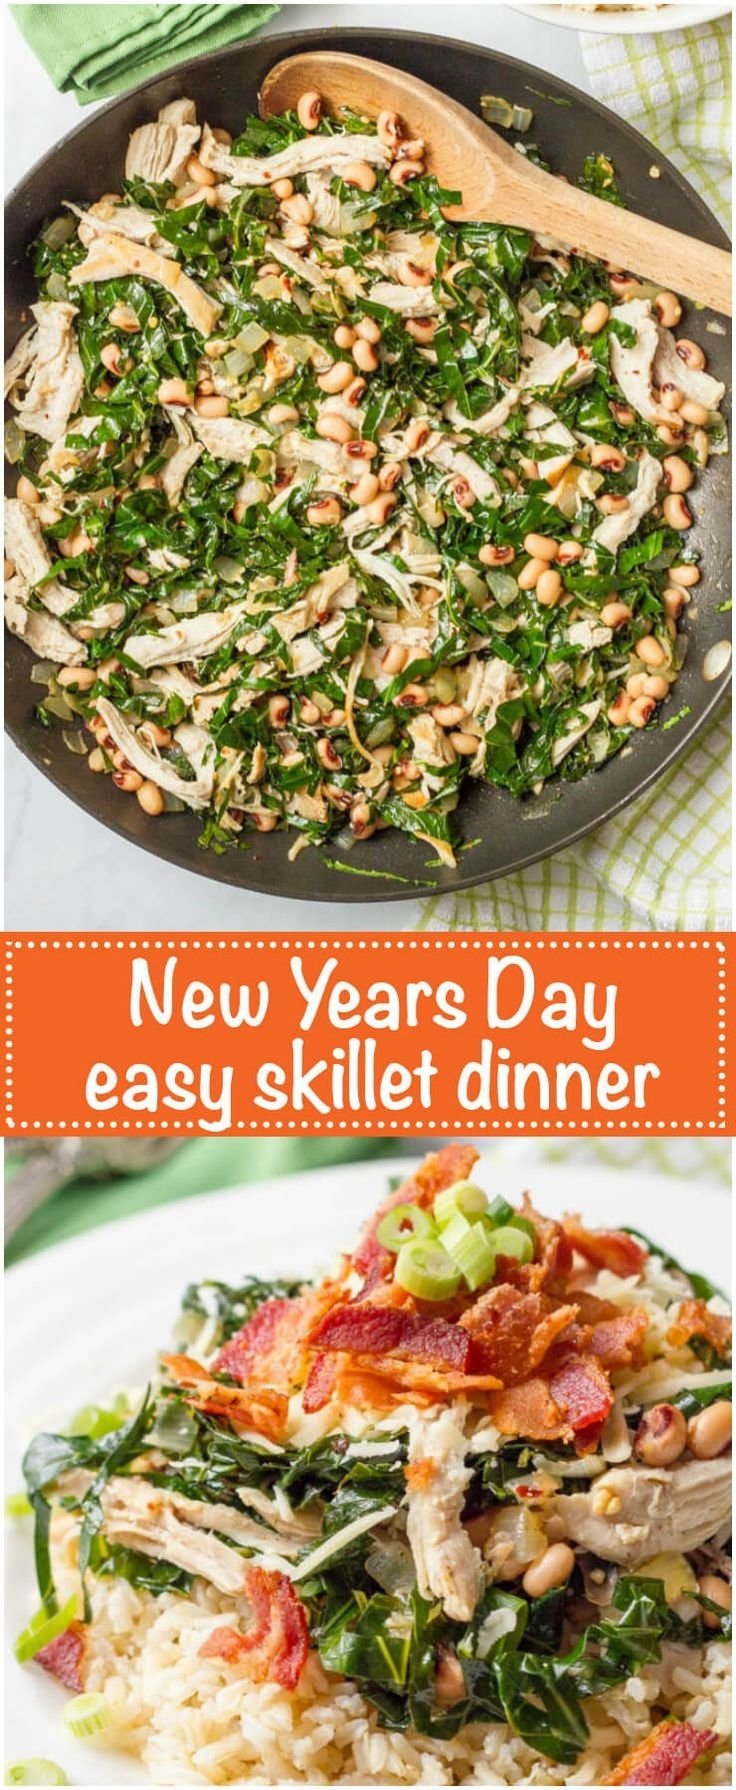 10 Gorgeous New Years Day Dinner Ideas 104 best new years recipes images on pinterest kitchens cocktail 2022